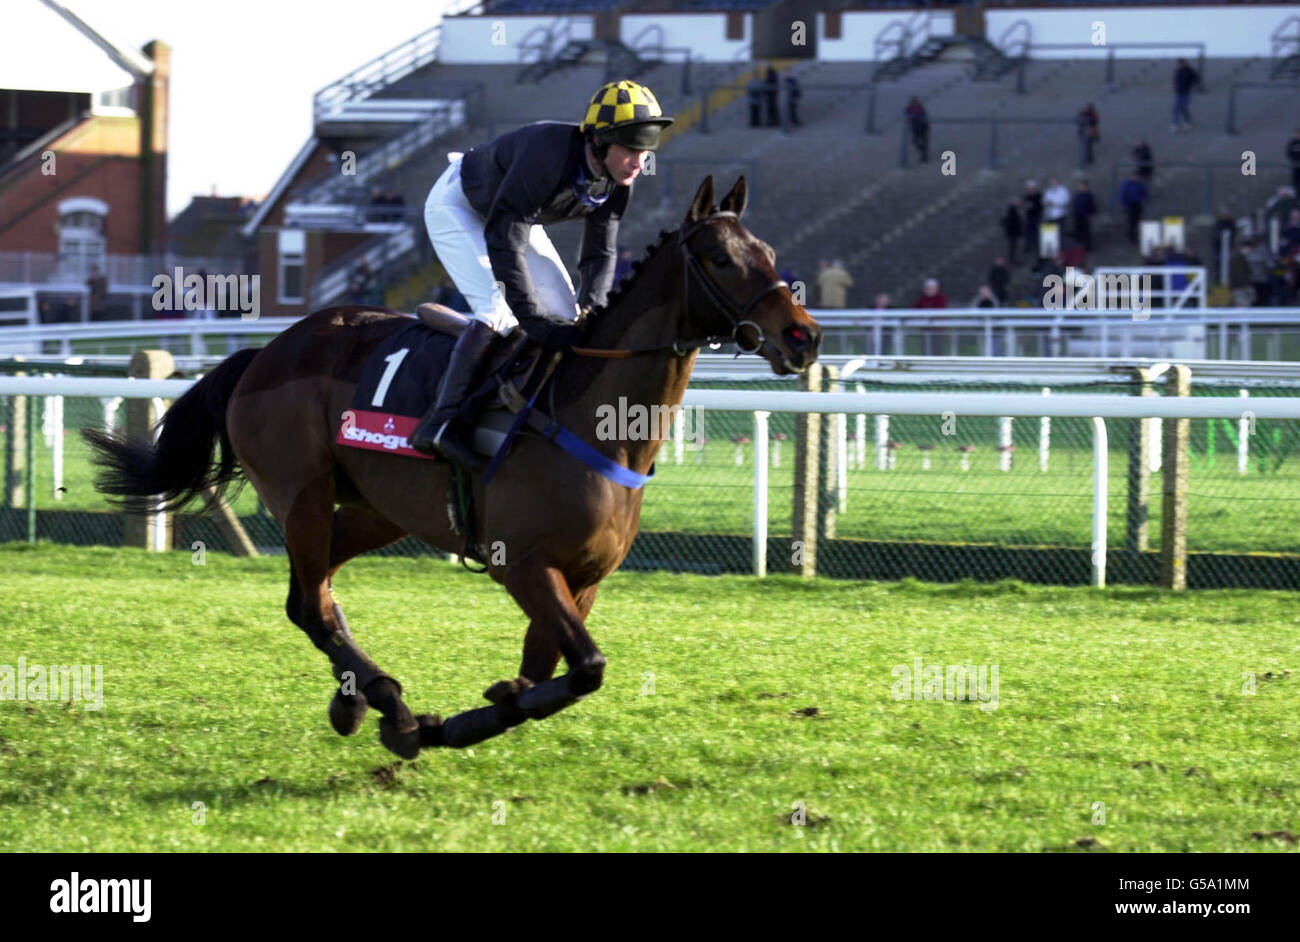 Horse Bellator, ridden by jockey Carl Llewellyn, returns to the stables after refusing to start in the Mitsubishi Shogun Ascot Chase at Ascot. The race was won by Tiutchev, ridden by Mick Fitzgerald, by 22 lengths. Stock Photo